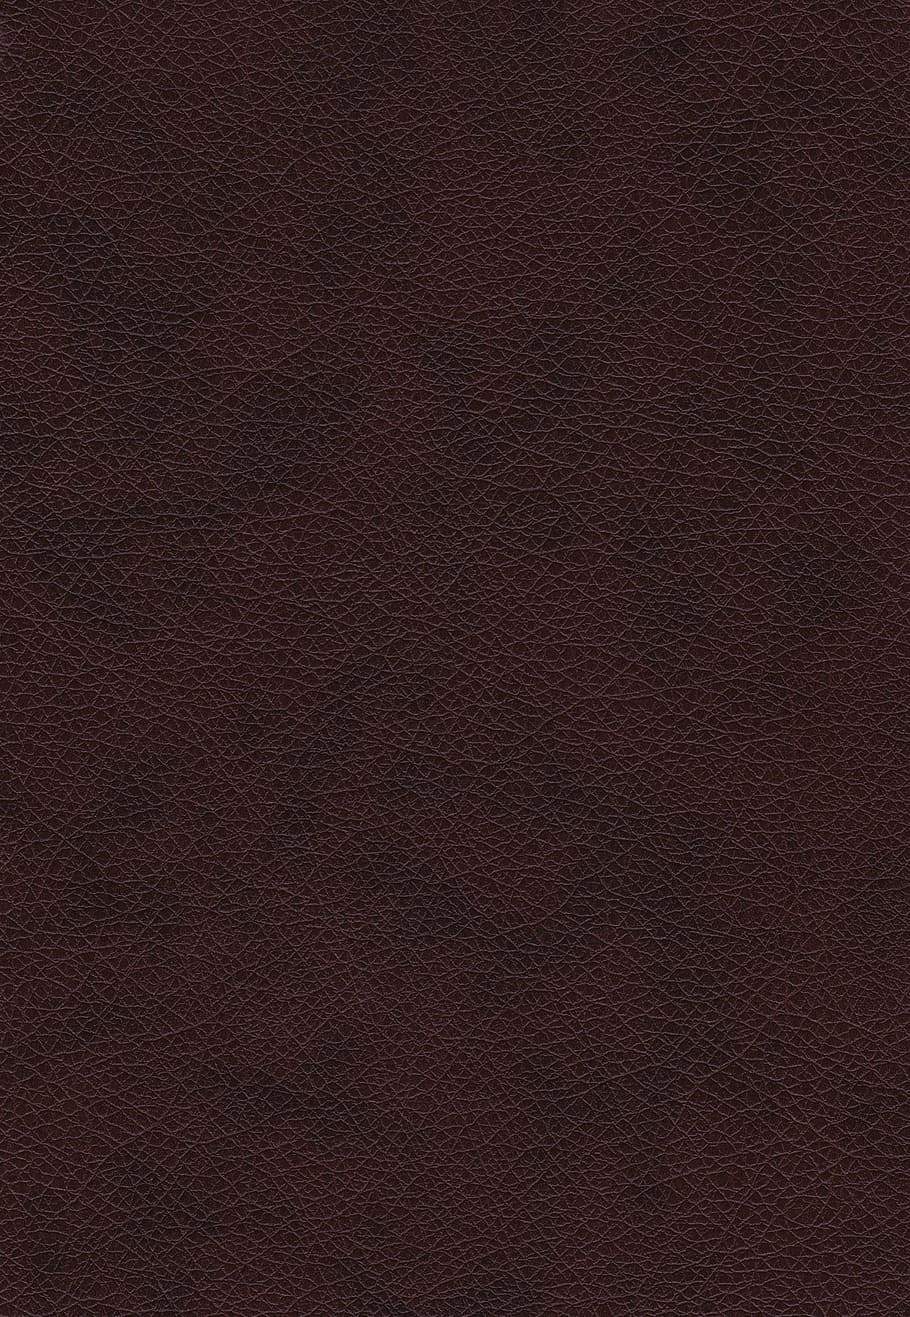 leather, textures, background, fabric, raw, decor, material, pattern, HD wallpaper